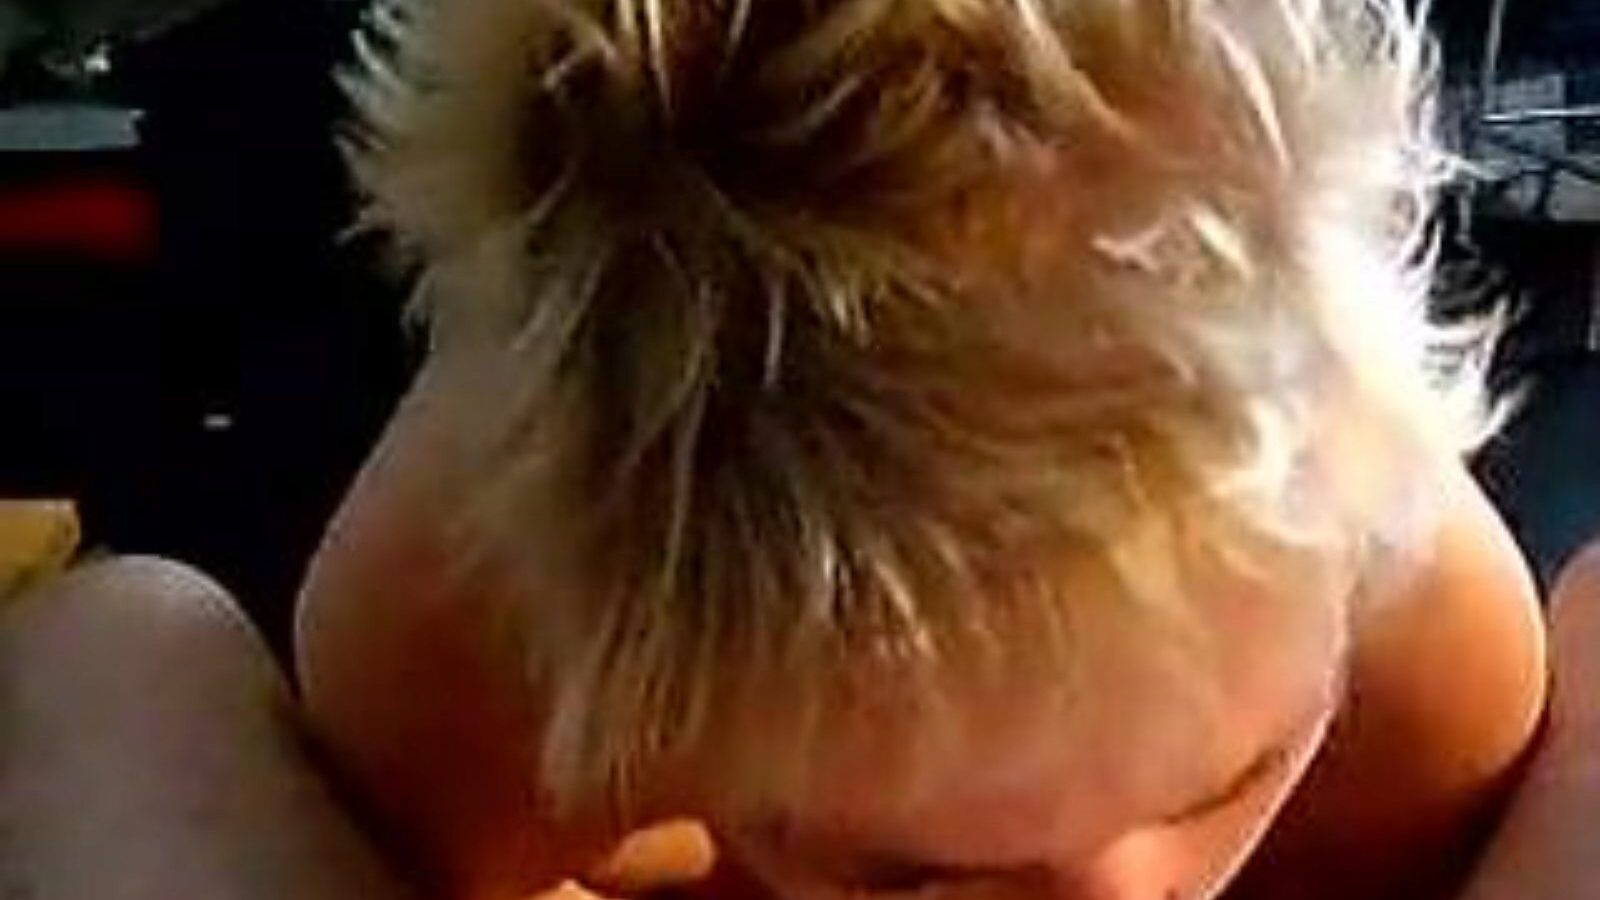 Leuke Dame: Homemade & Old Girl Porn Video a6 - xHamster Watch Leuke Dame tube fuckfest movie for free on xHamster, with the hottest collection of Dutch Homemade, Old Girl & Sucking pornography clip gigs